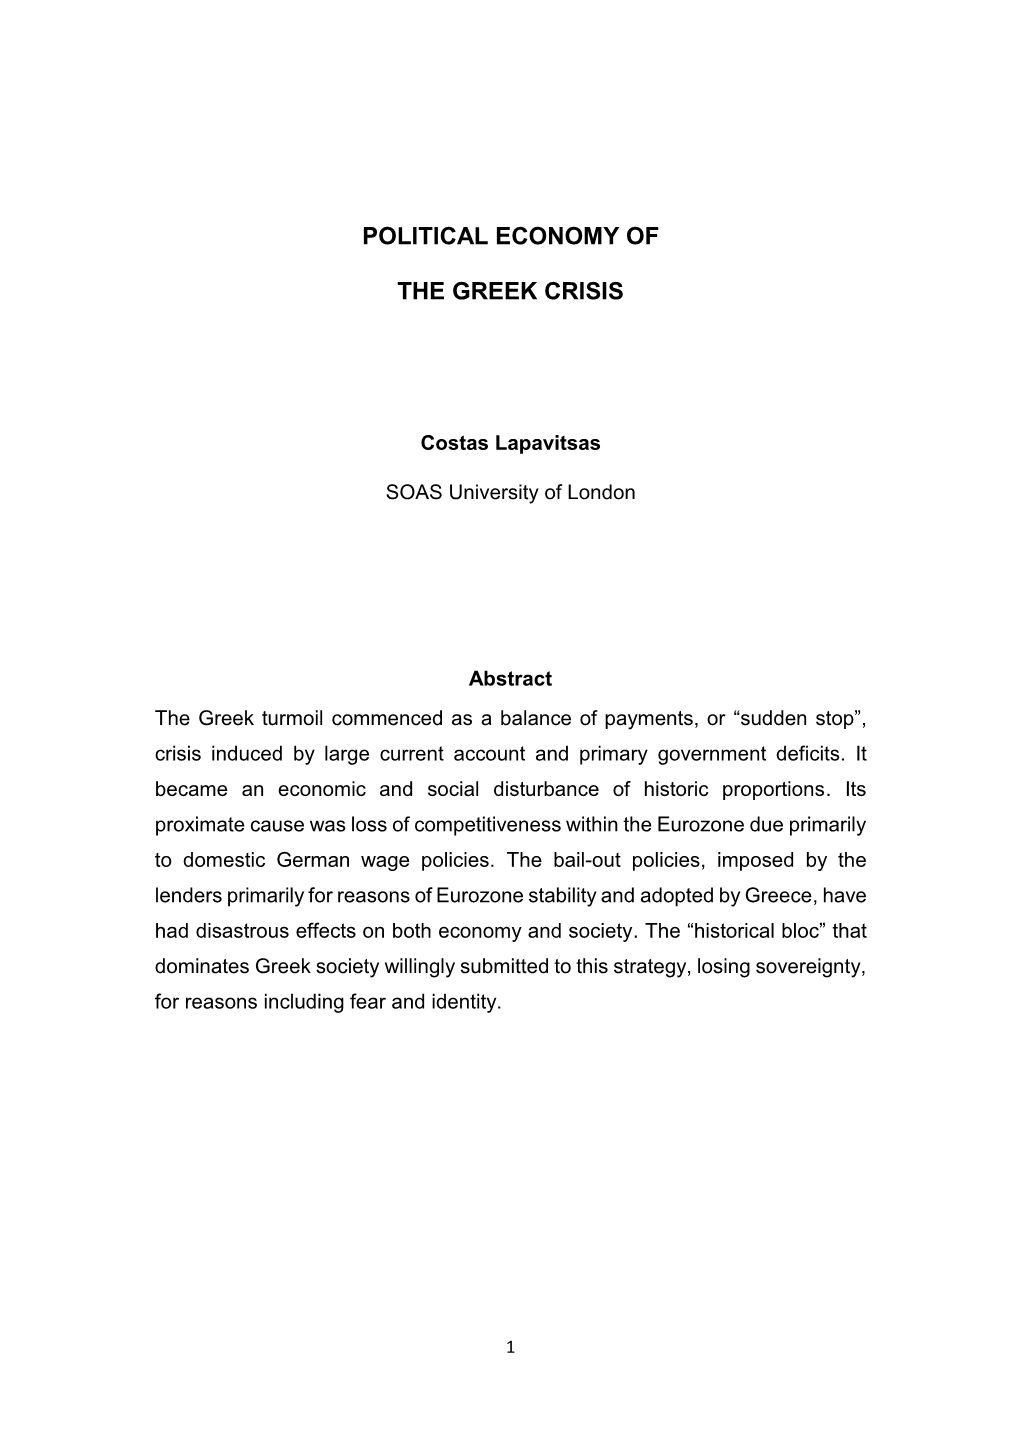 Political Economy of the Greek Crisis